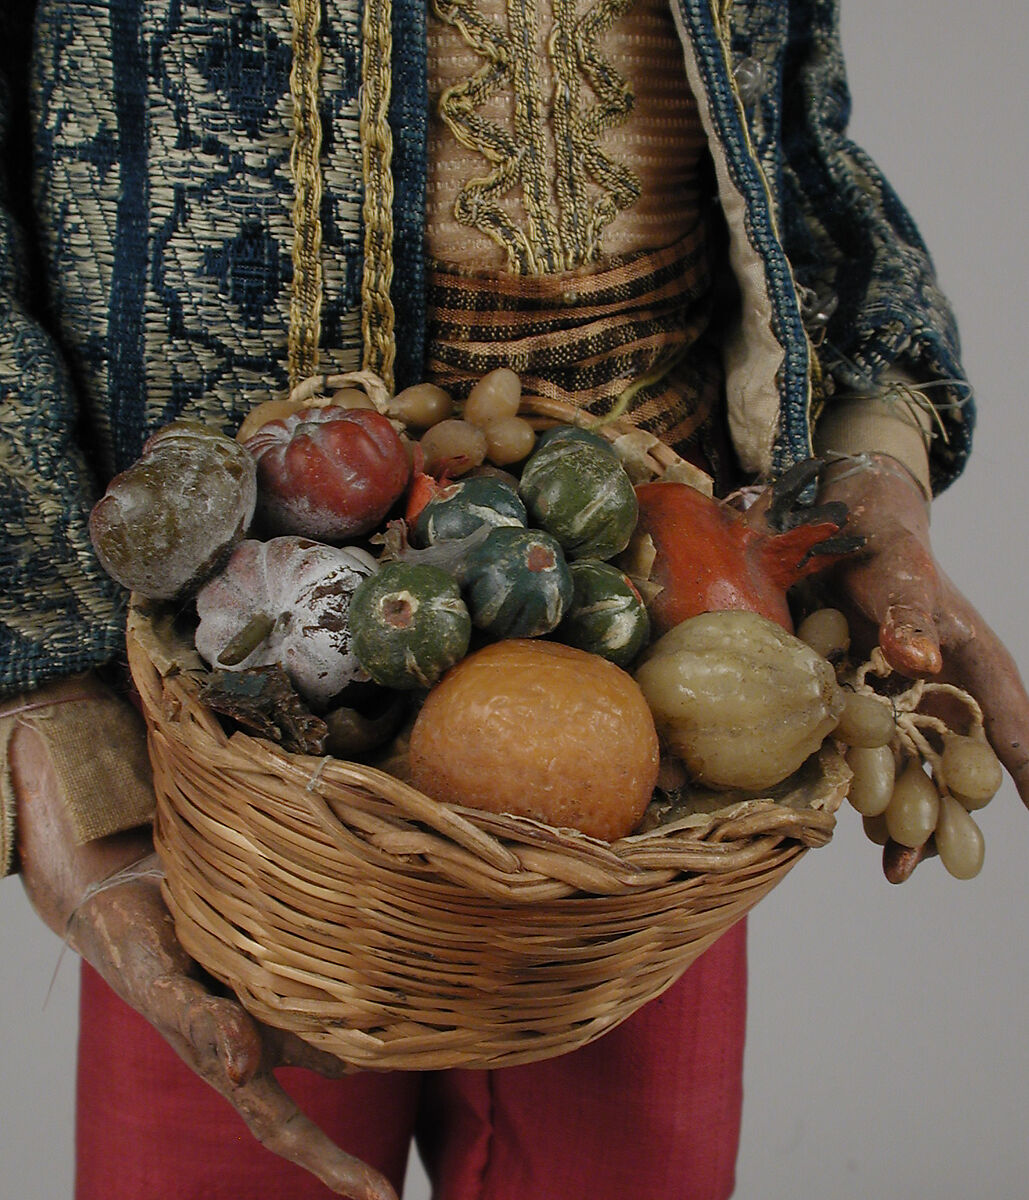 Basket of fruit and vegetables, Wax and wicker